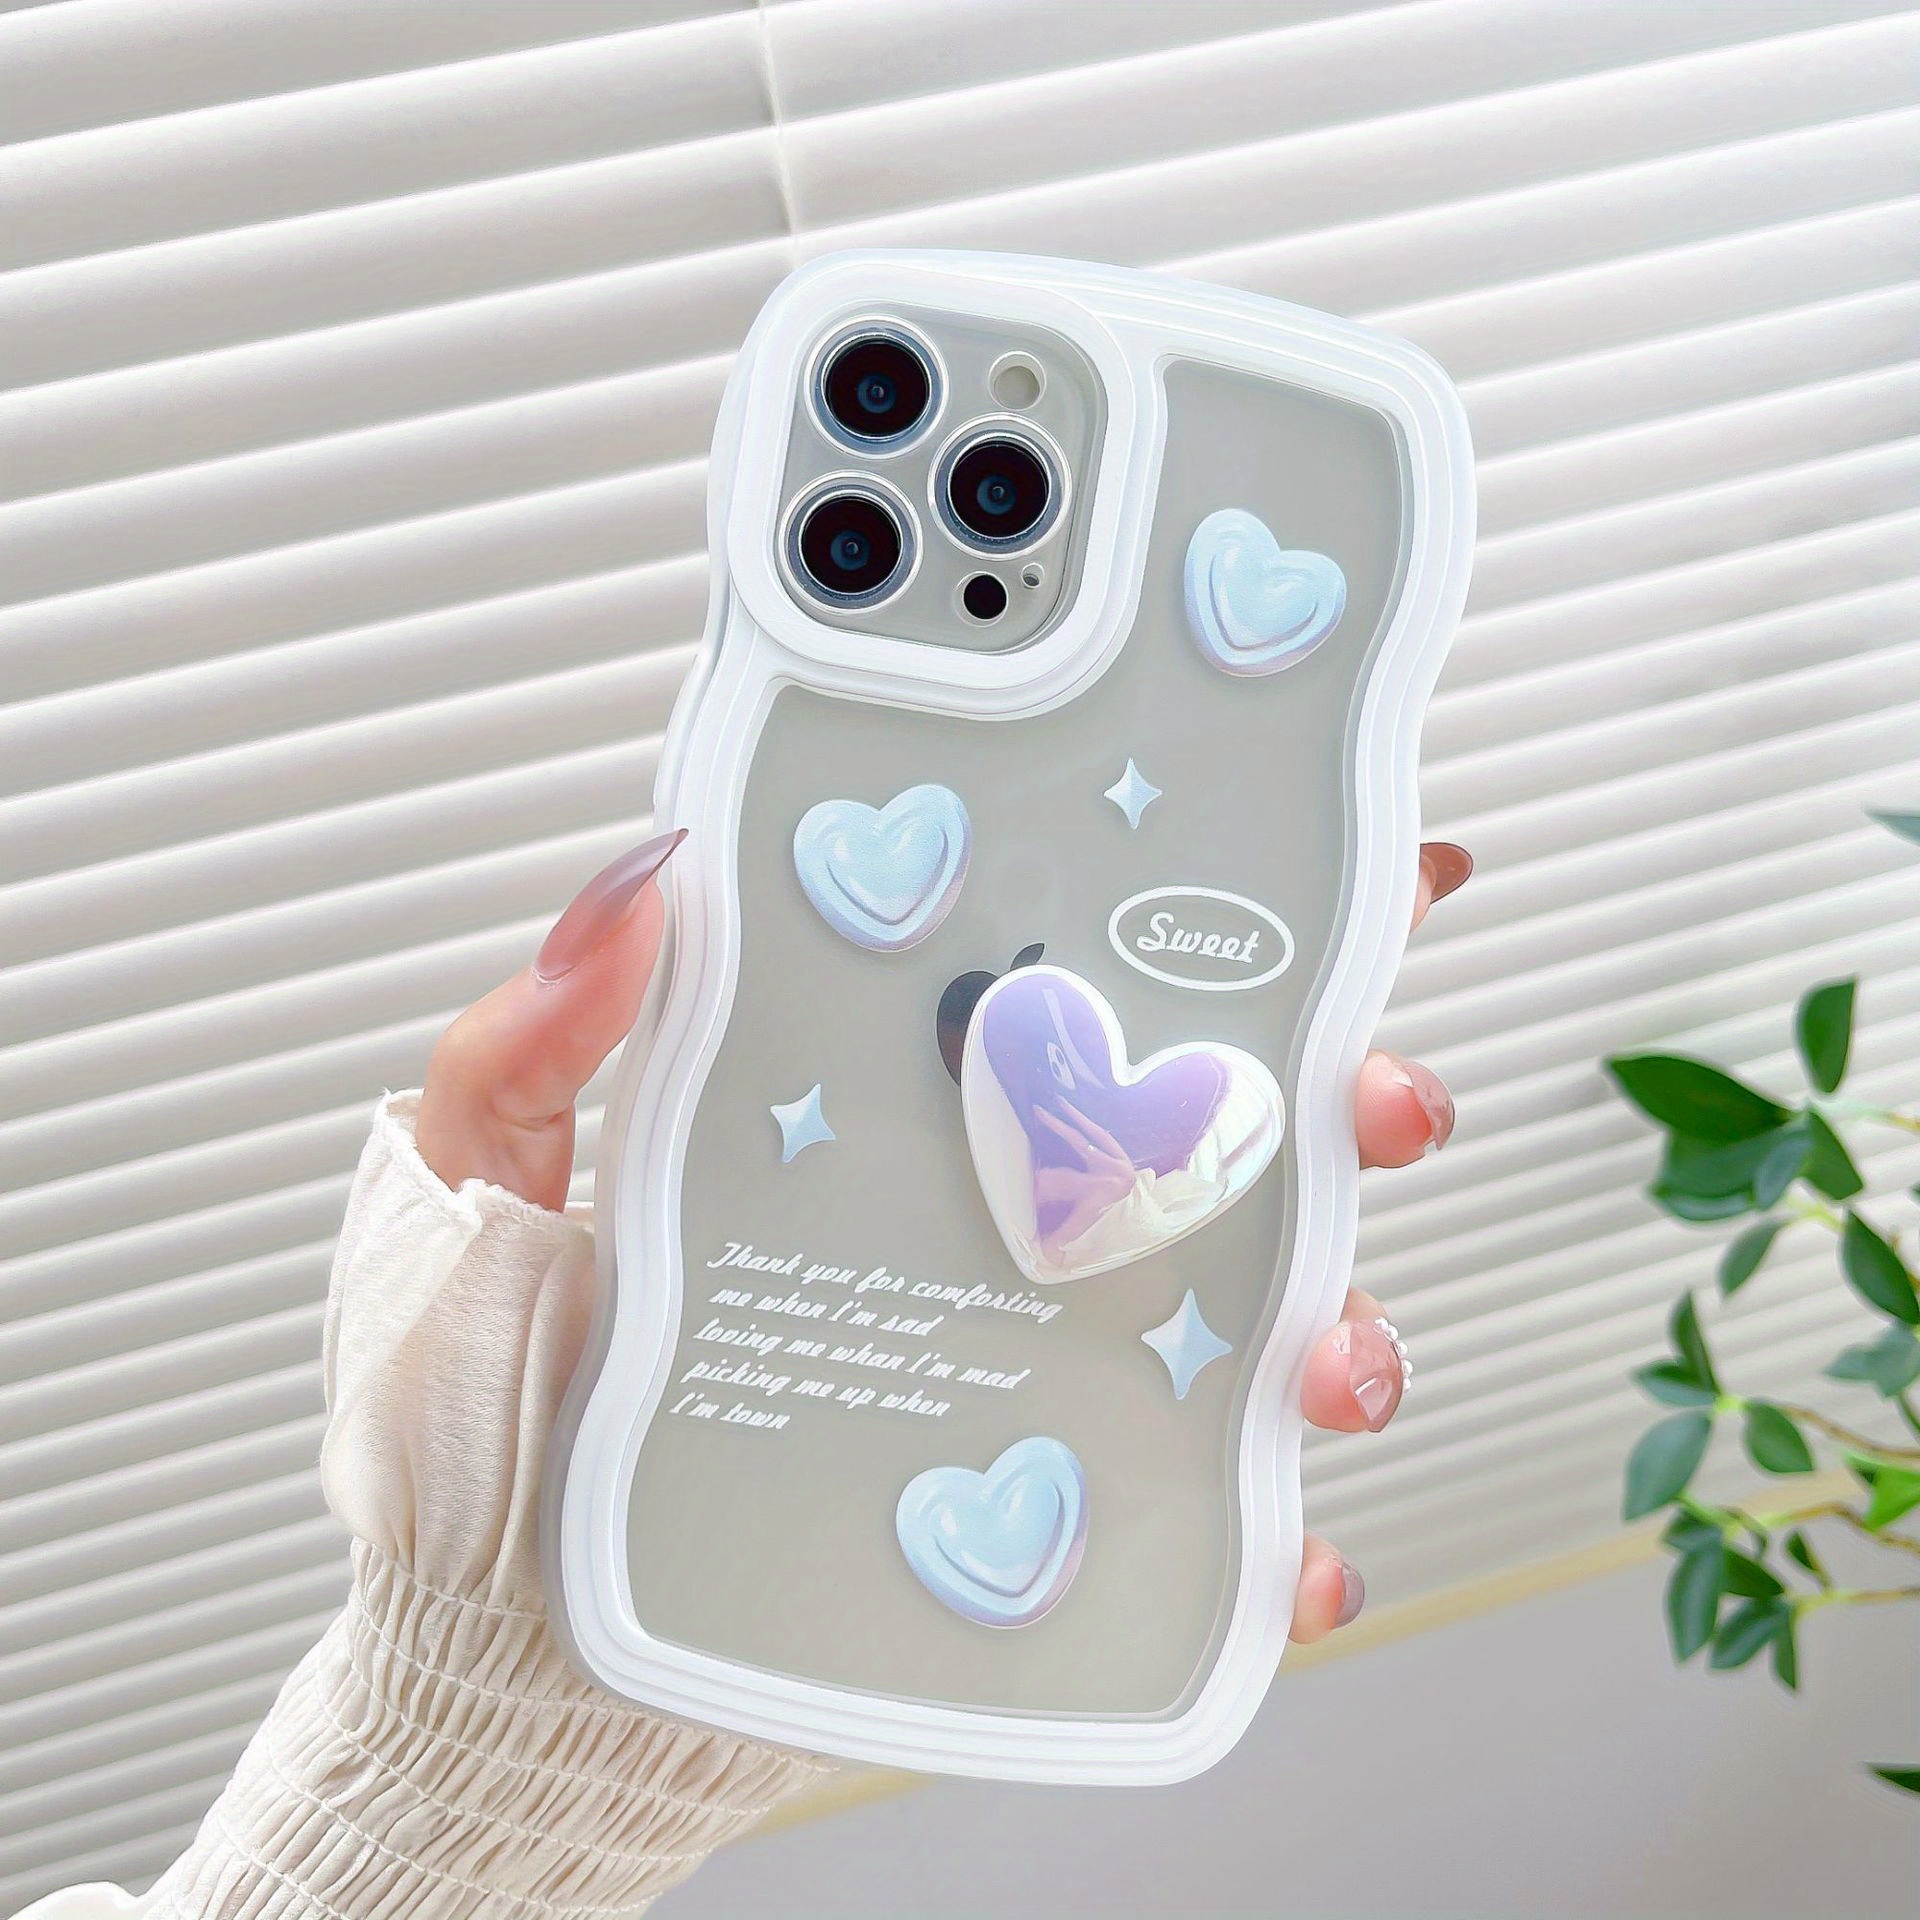 For IPhone 14 Pro Max Case Cute Love Heart Design For Women Girls, Soft TPU  Bumper Girly Phone Case With Full Camera Cover,Sparkly Pearl Bead Bracelet